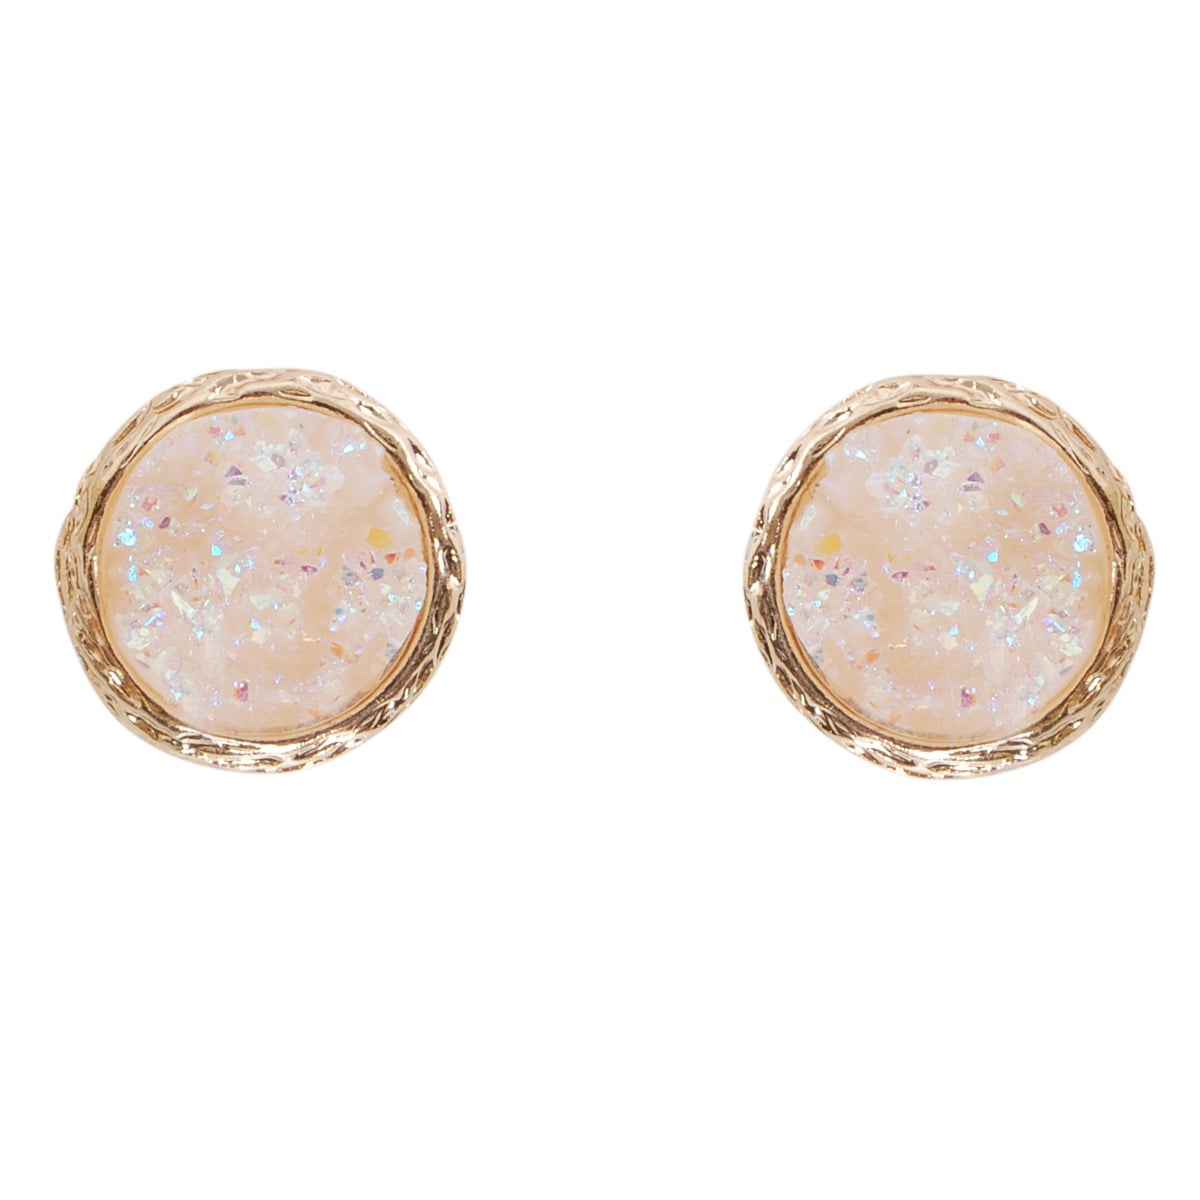 Humble Chic Ny - Humble Chic Simulated Druzy Studs - Gold-Tone Plated Round  Circle Simple Minimalist Crystal Post Ear Stud Earrings for Women, 16mm 